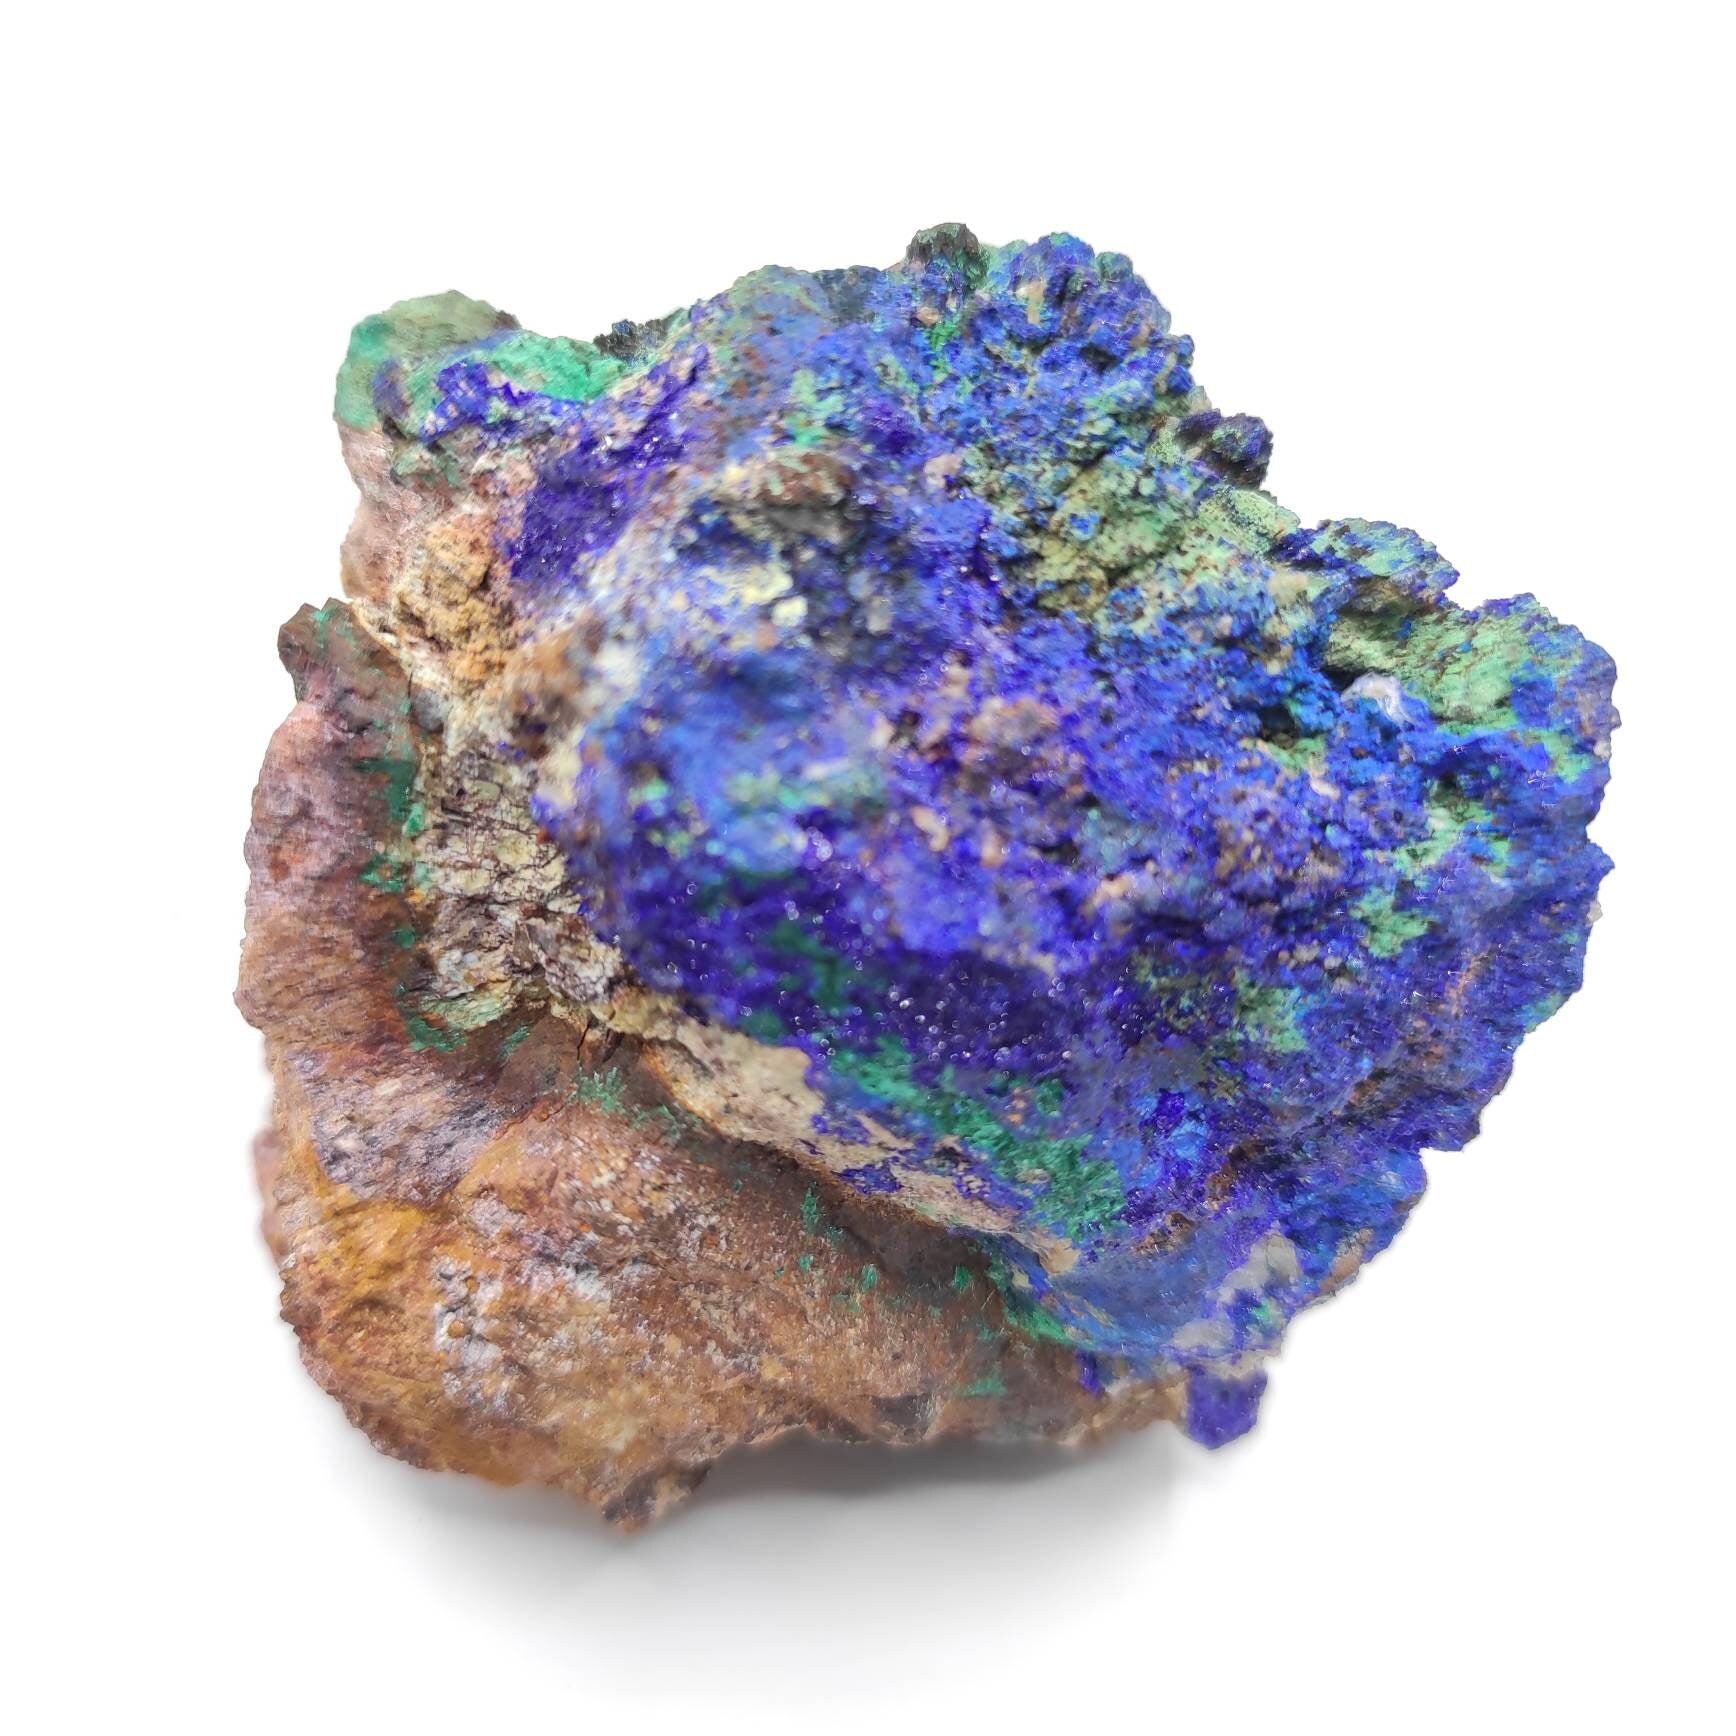 259g - Large Azurite and Malachite Crystal Specimen - Blue Azurite from Laos - Natural Raw Azurite Mineral - Rough Azurite Healing Crystal